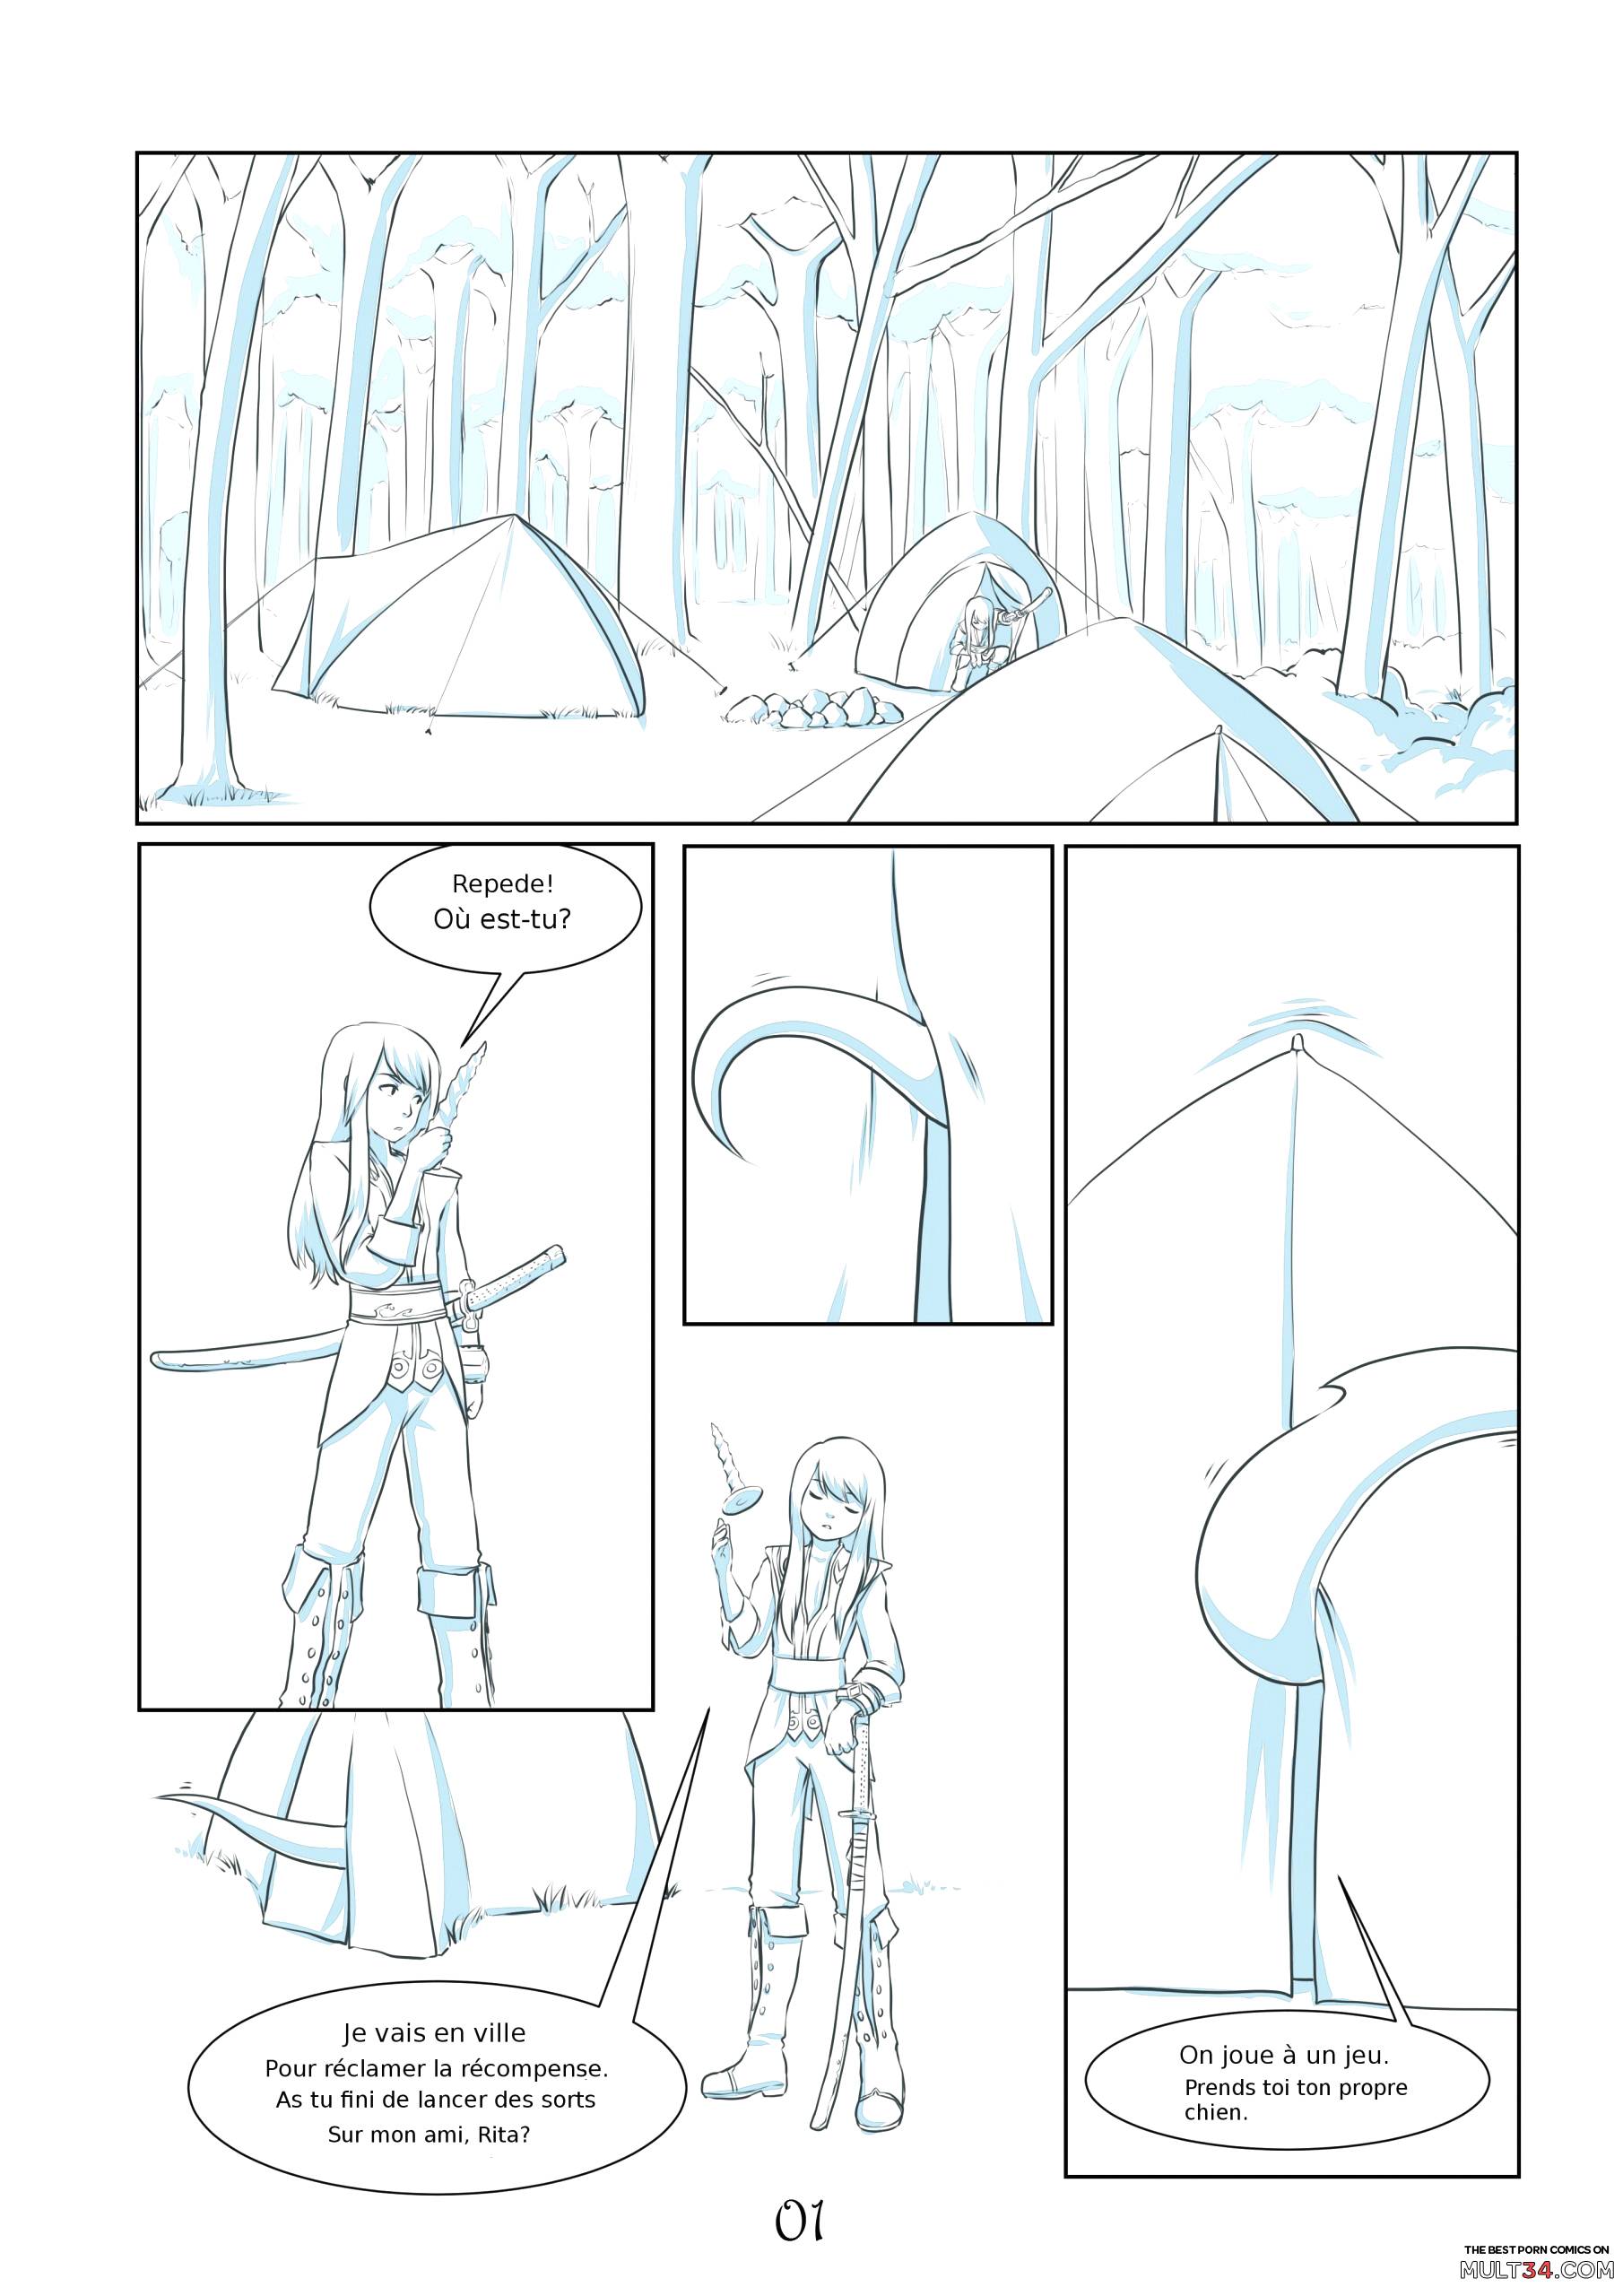 Tales of Rita and Repede - Episode 2 page 2